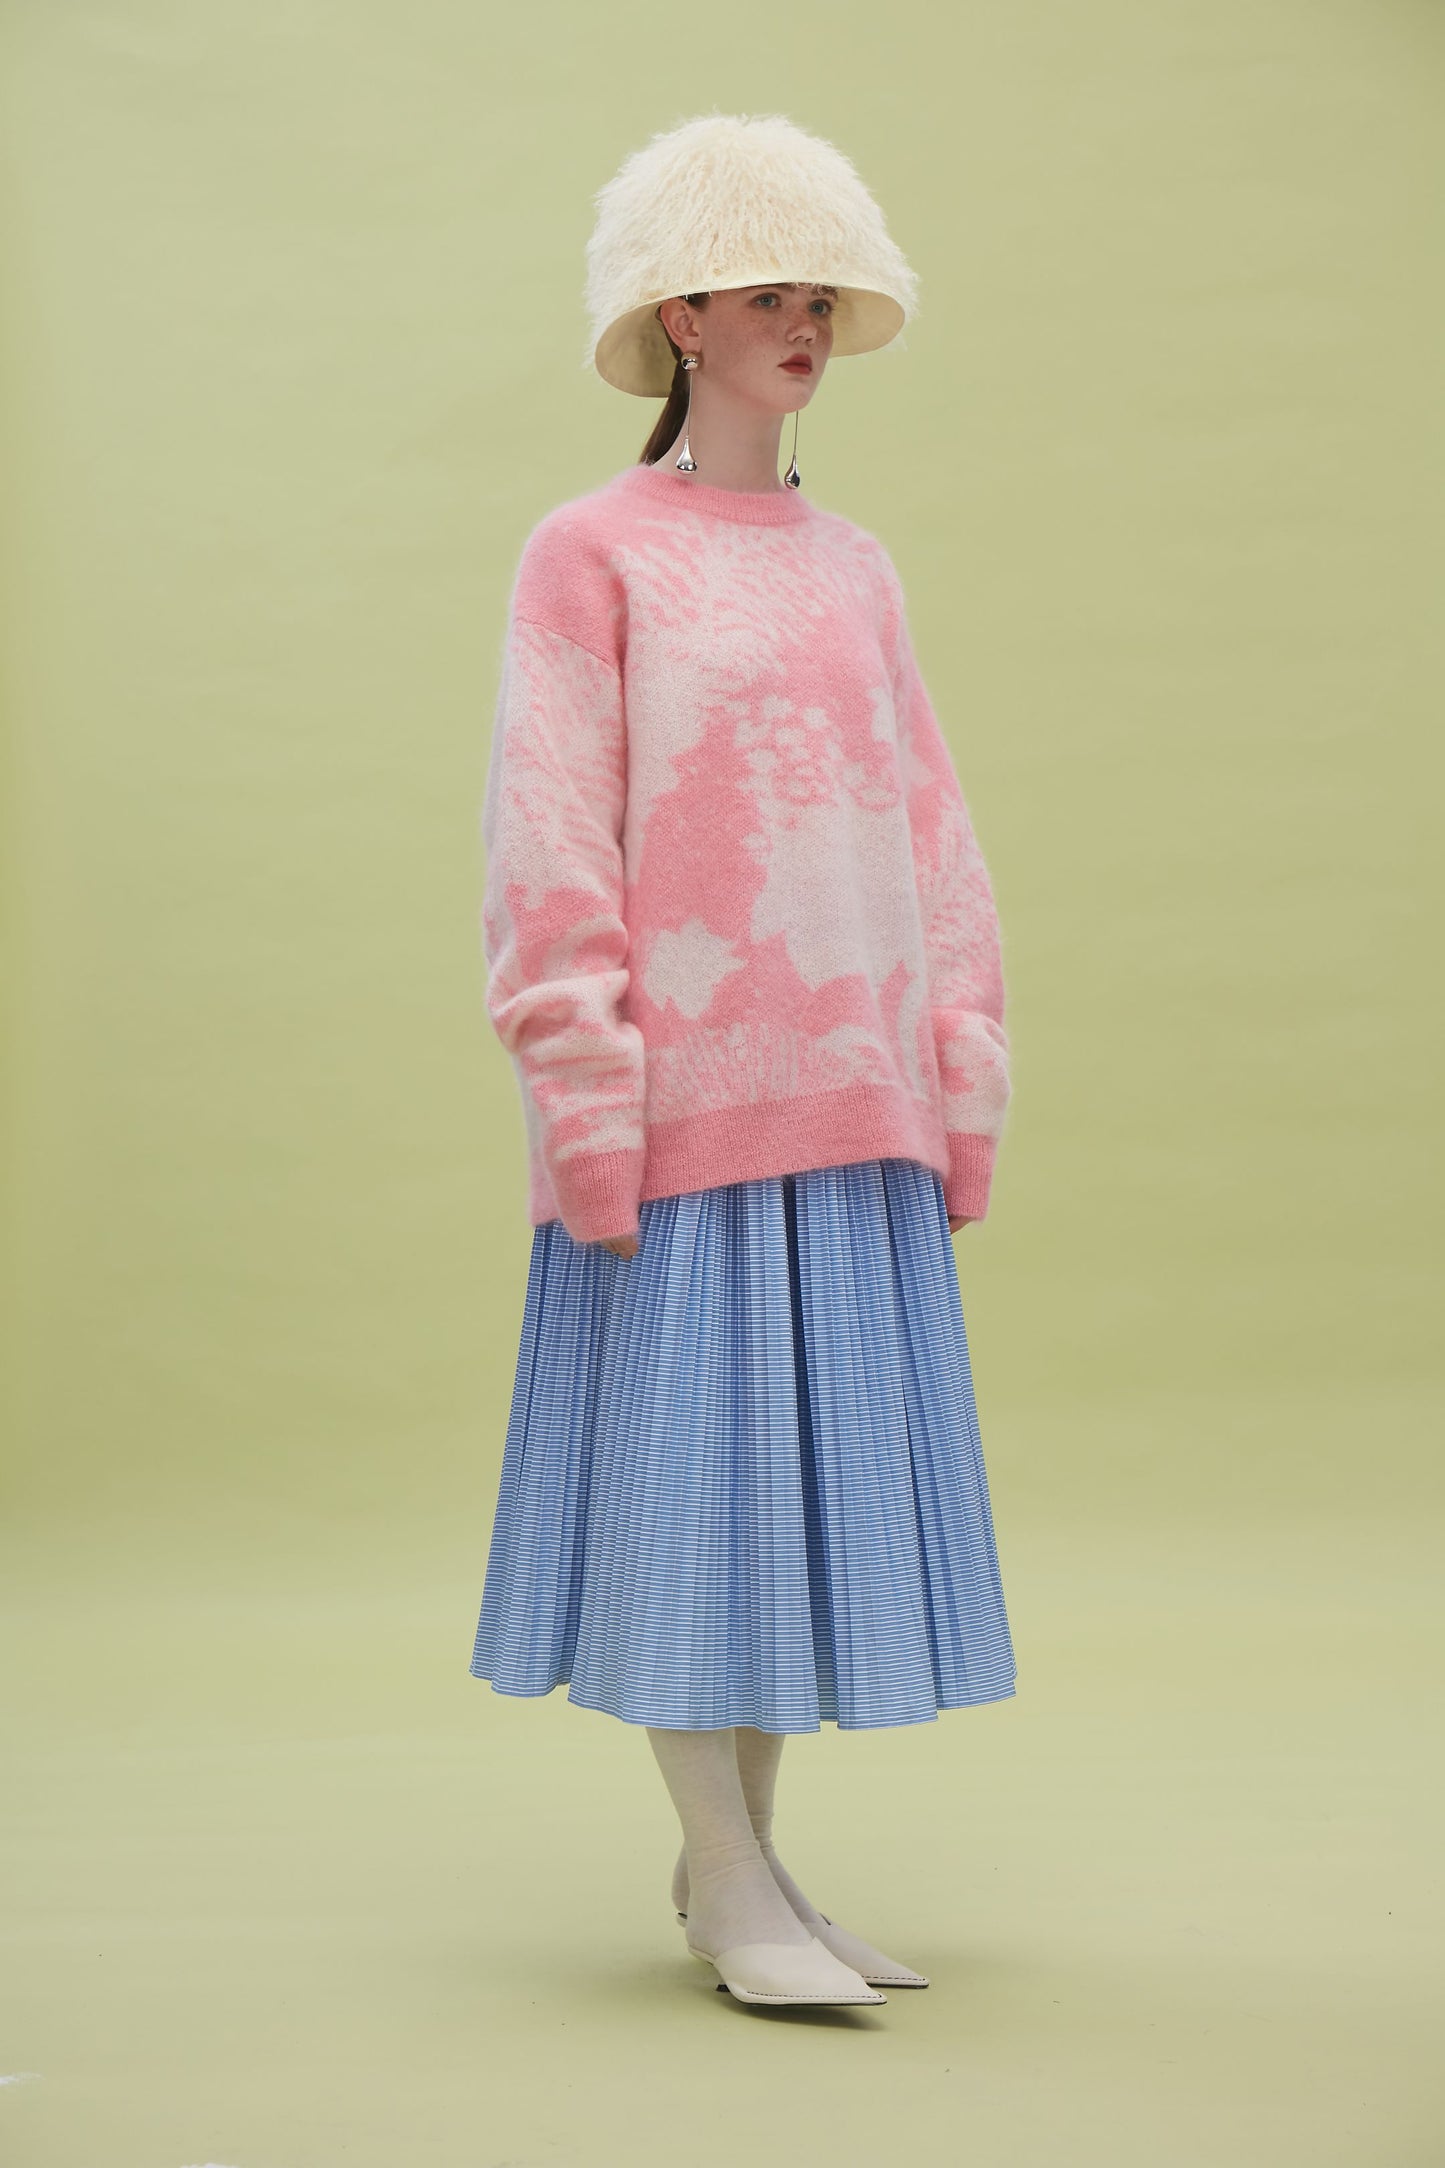 ANGEL CHEN FLORAL JACQUARD KNIT MOHAIR SWEATER